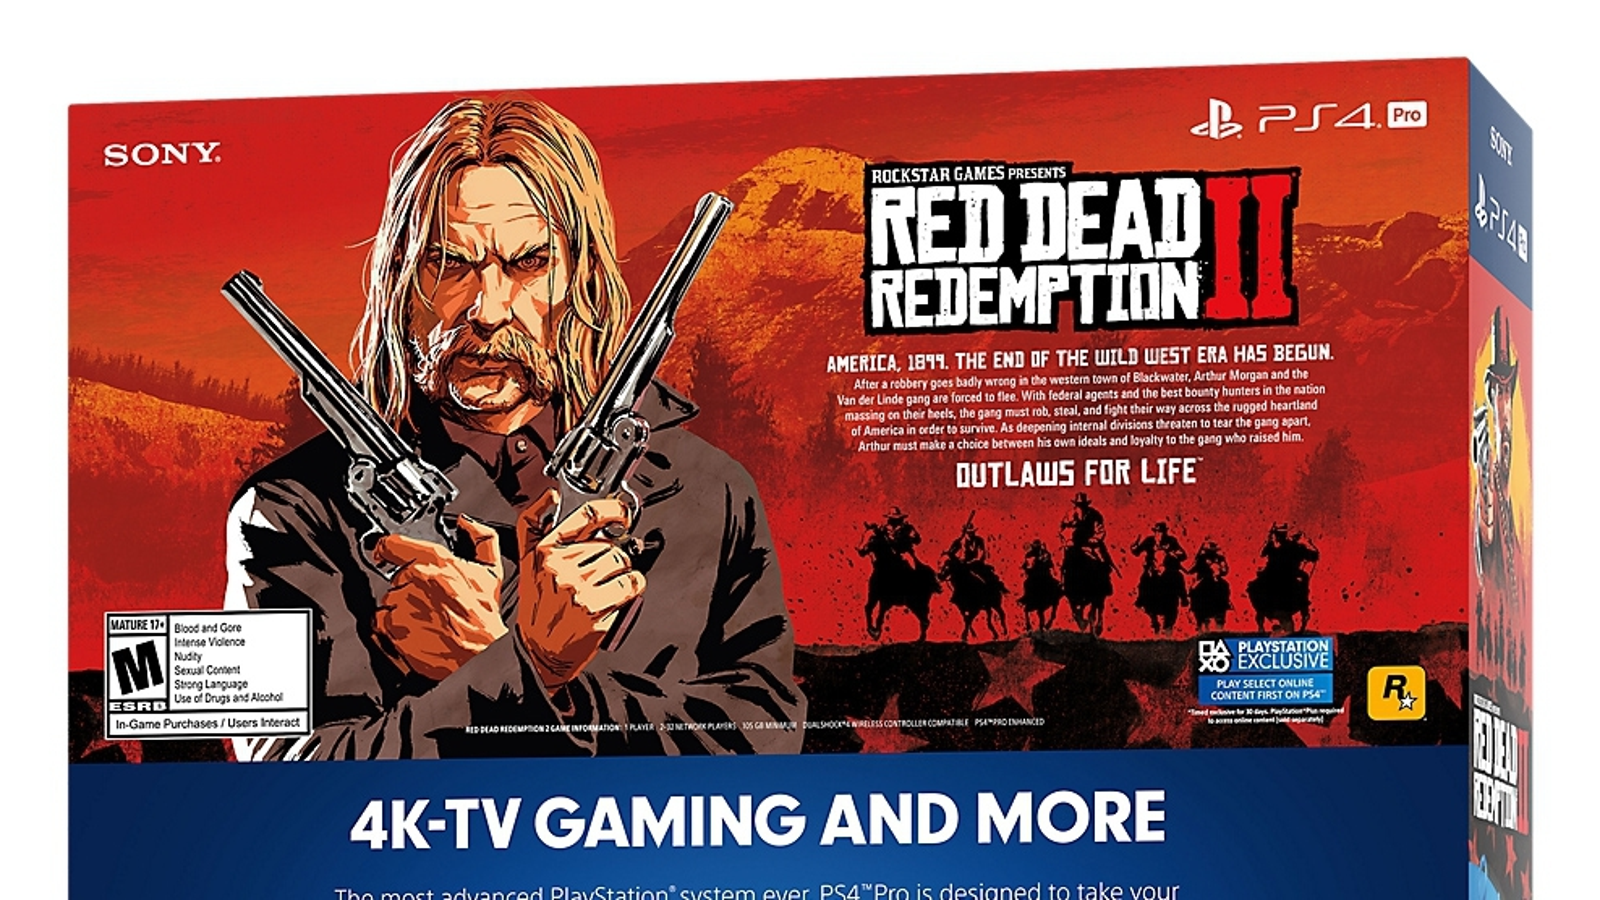 Brace yourself: Red Dead Redemption 2 requires 105GB of storage